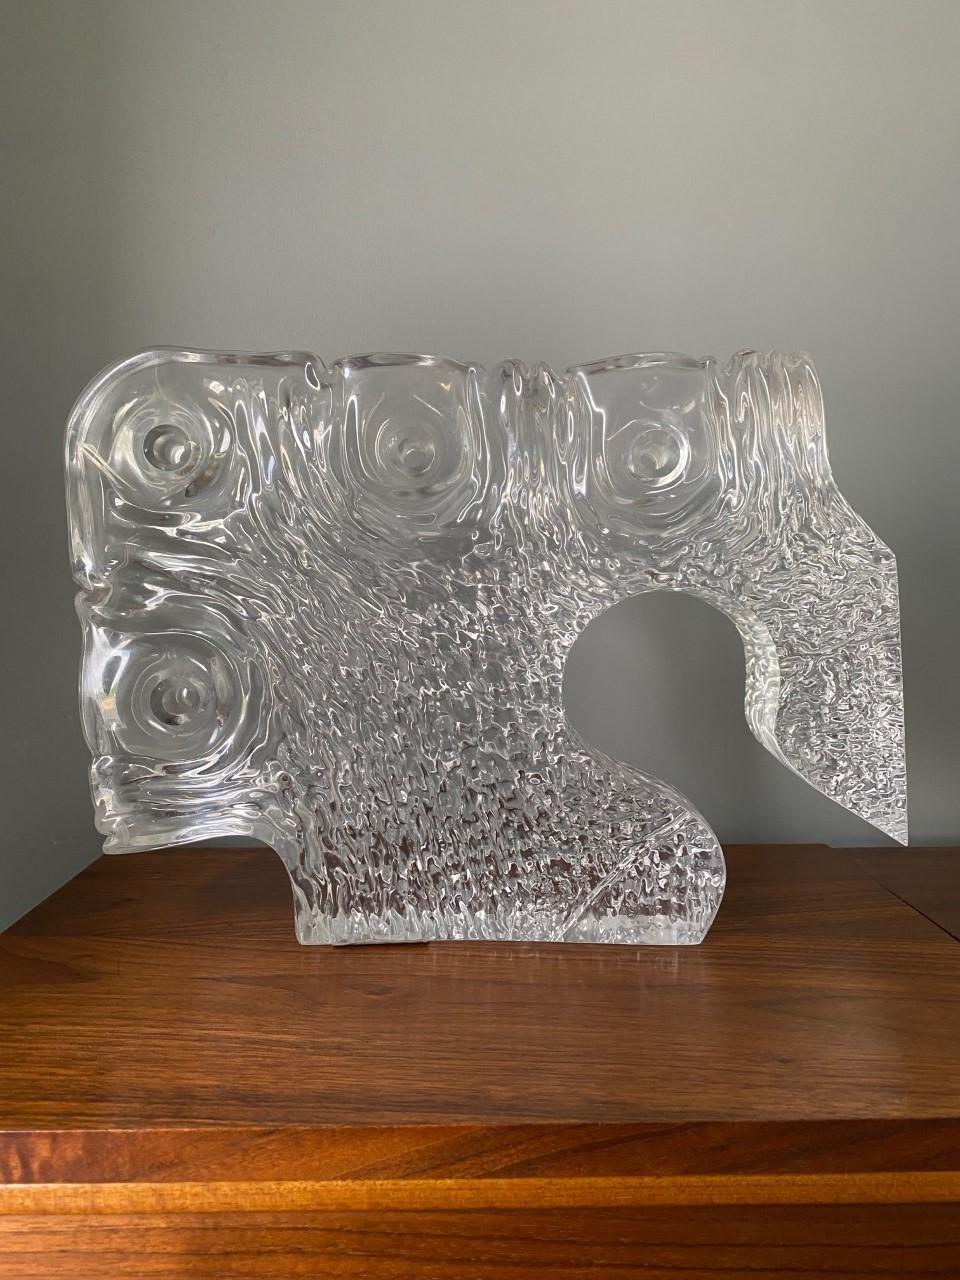 A sculptural interpretation of an organic shape that is enigmatic, poised and unpredictable. A study in form, this vintage lucite piece dates to the early 1960s. In essence it is minimal and clean but conjures with a brutalist presence. Ondulations,